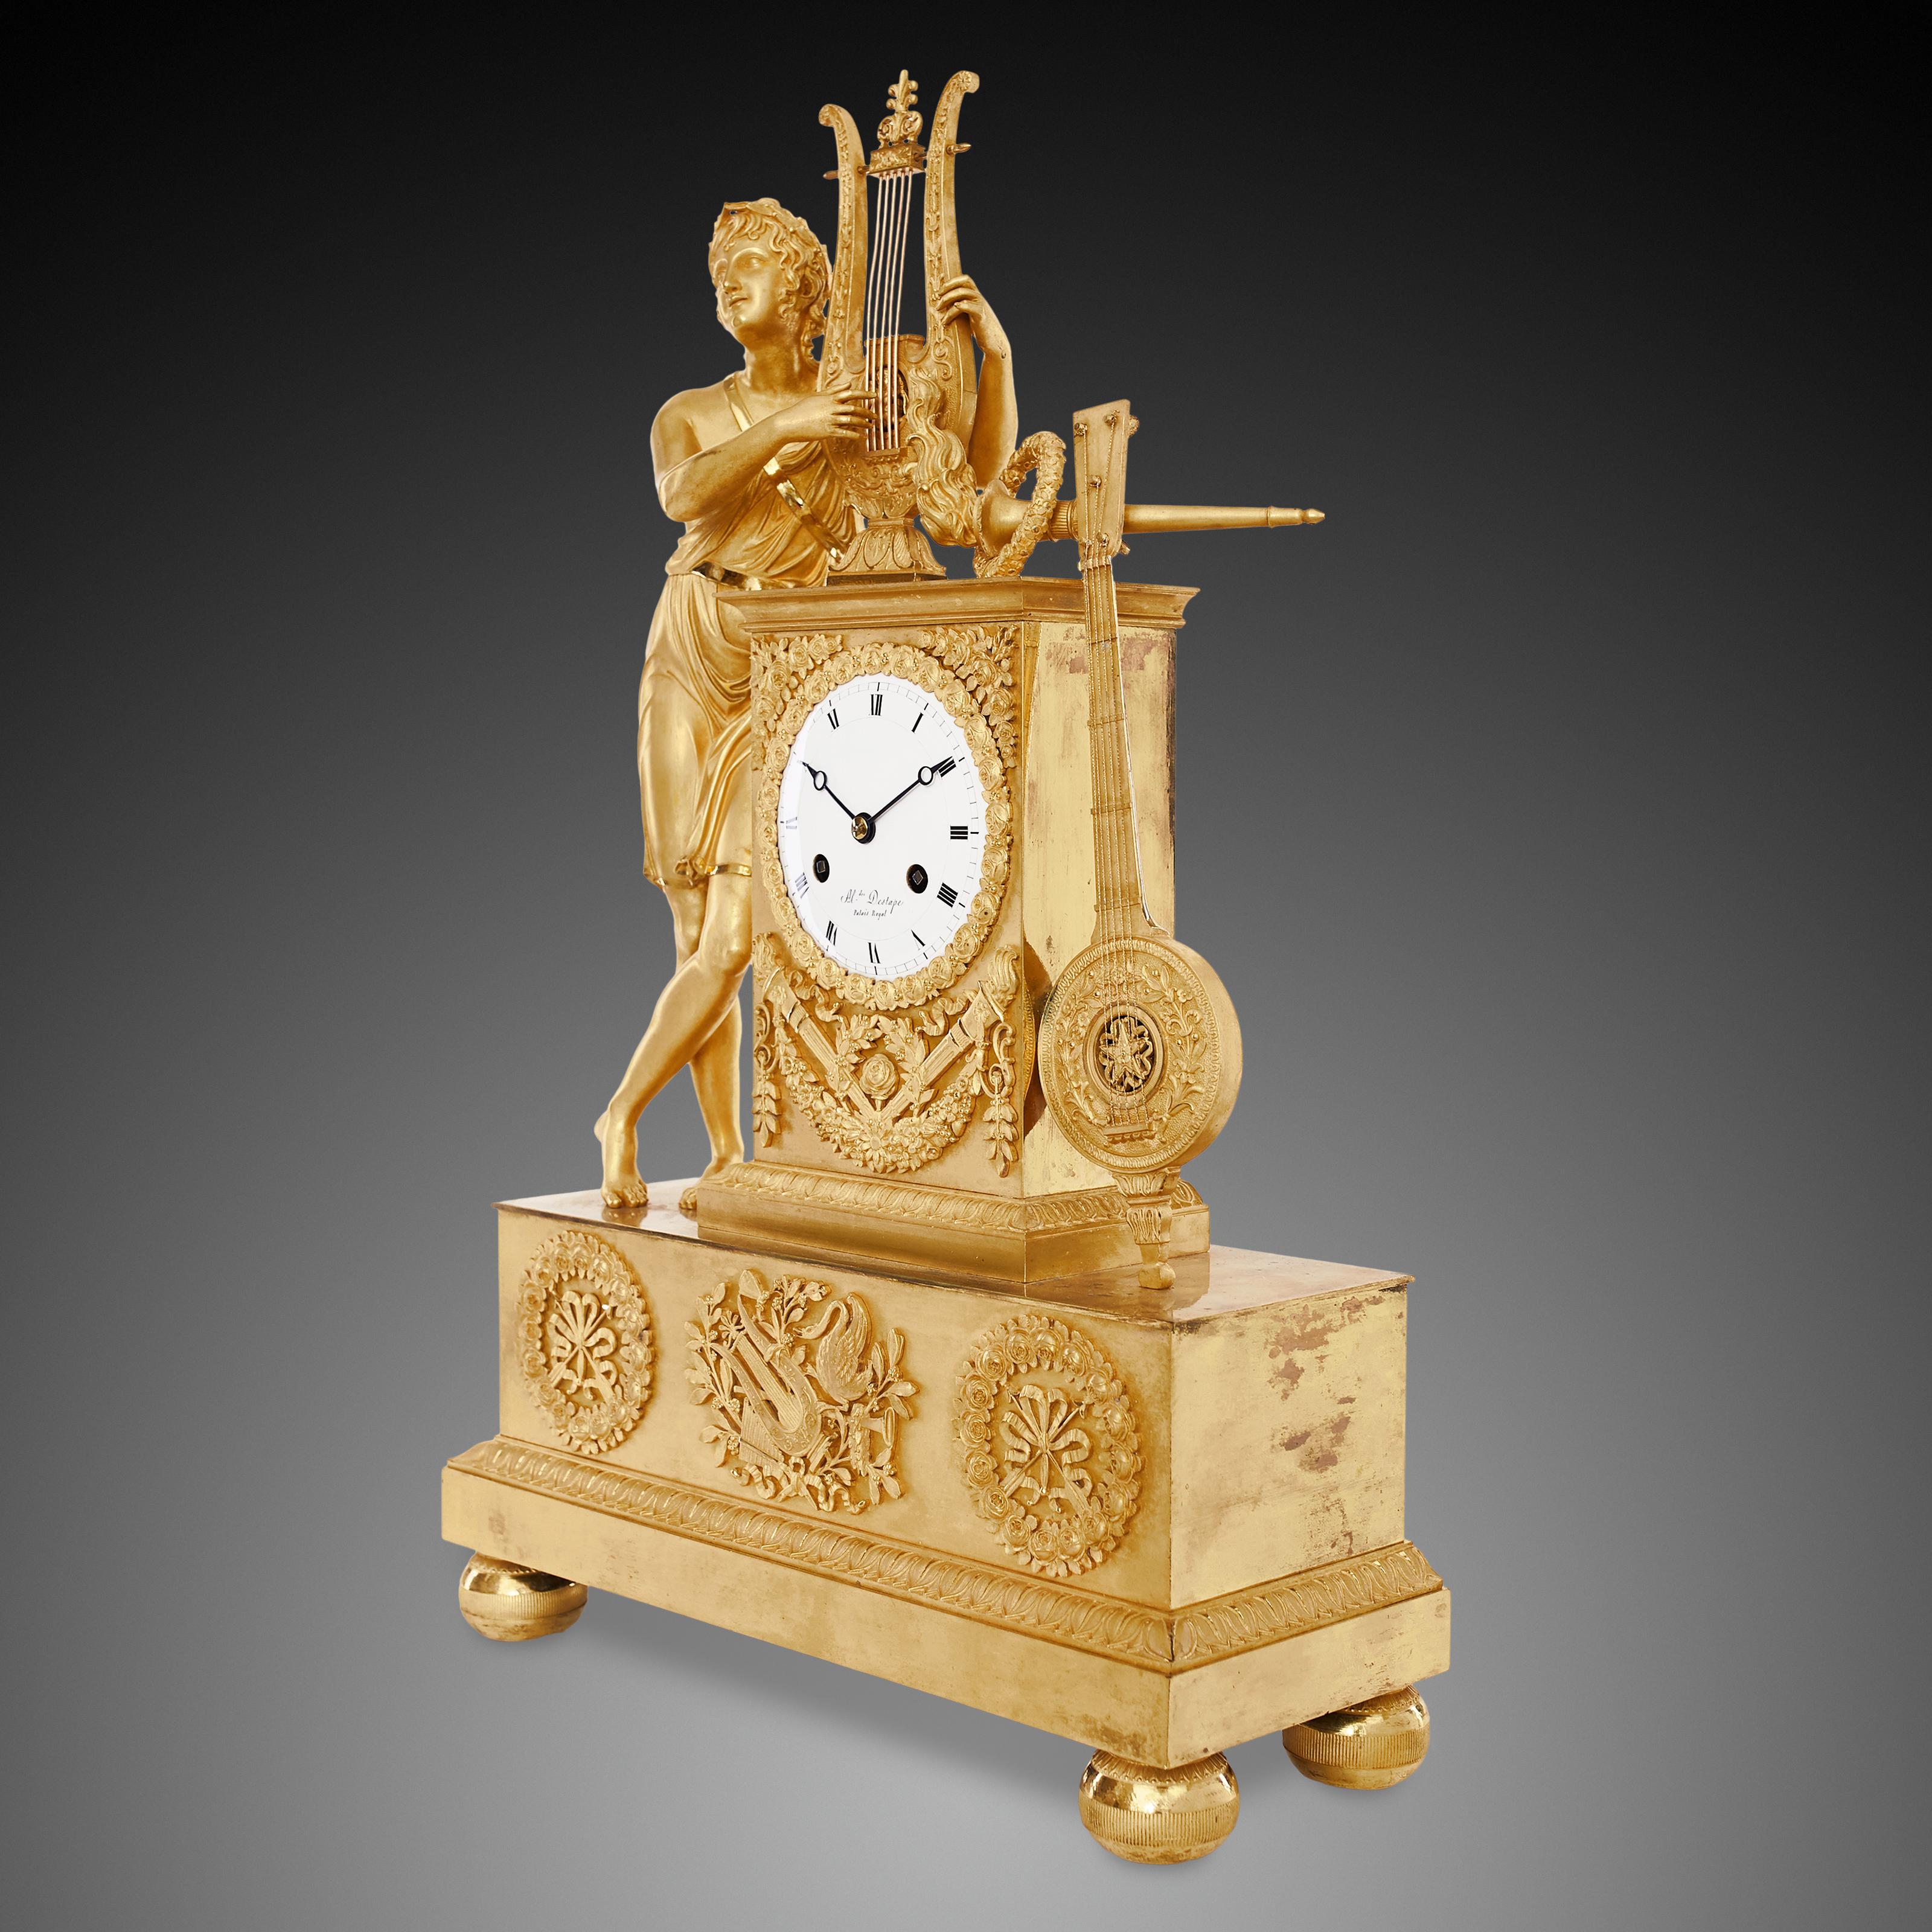 Figural mantel clock signed “Al. dre Destape Palais Royal”
The bronze figural mantel clock depicting one of the mythical heroes - Orpheus originates from the Empire period. The clock is made in a characteristic Empire style, a major phase of